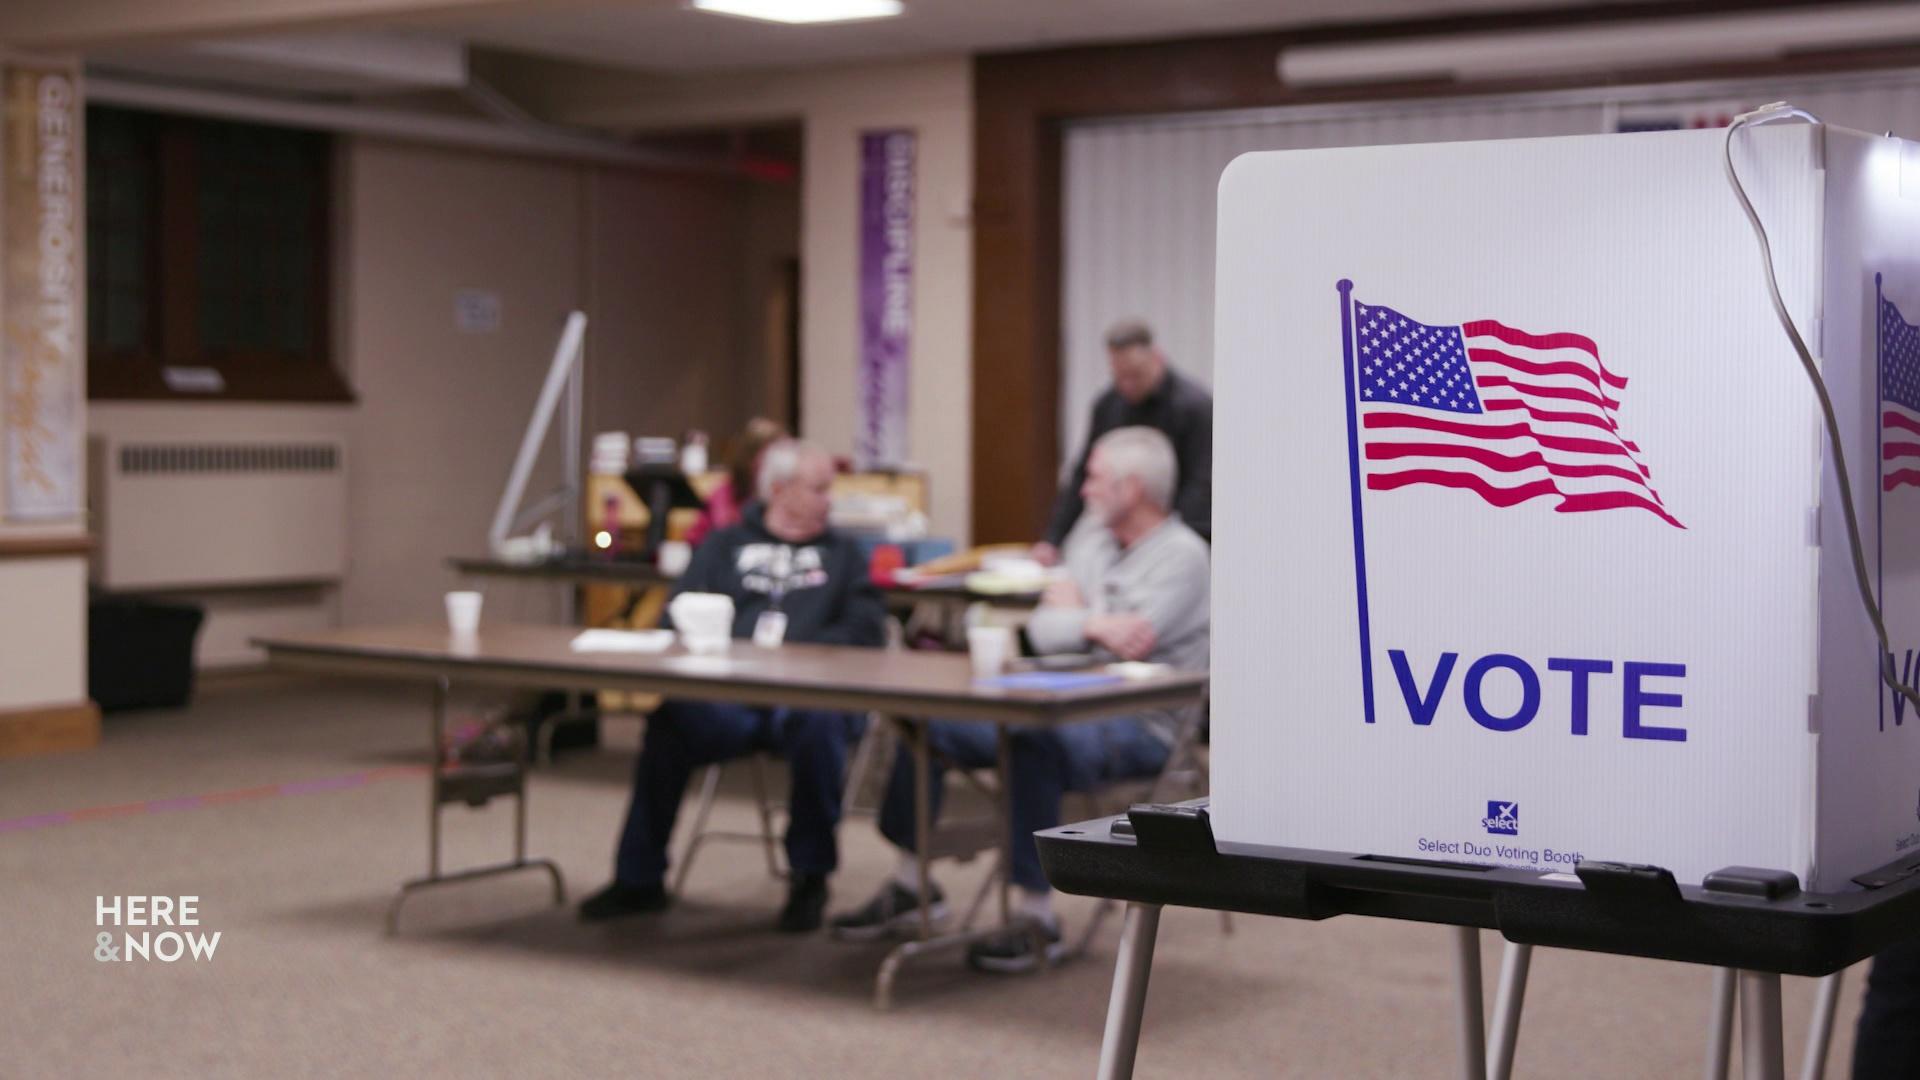 A still image shows two people seated at a table out of focus with a polling booth with a screen with the word 'Vote' and a graphic of the U.S. flag in focus to the right.